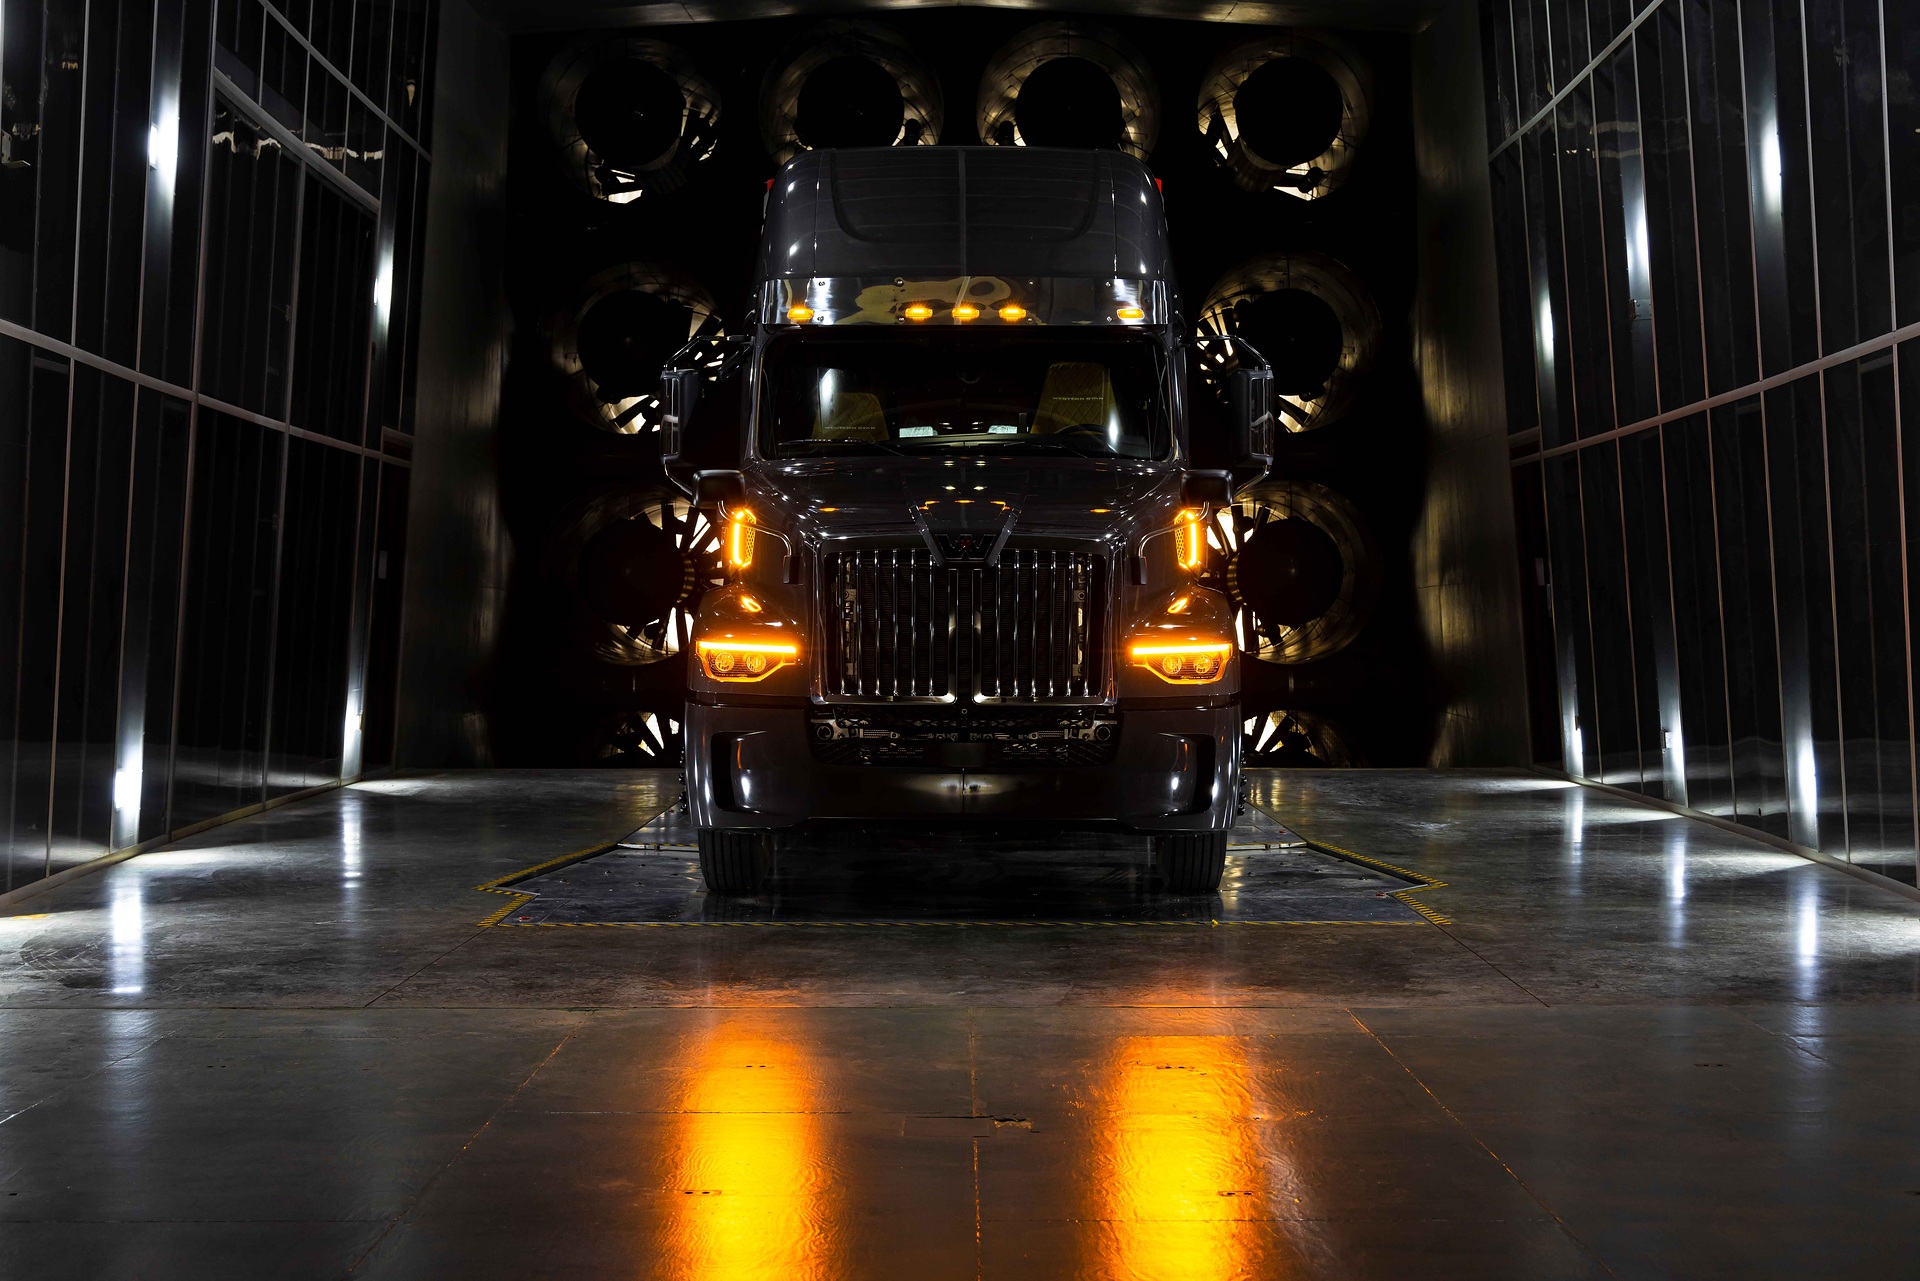 Daimler Truck introduces all-new Western Star 57X on-highway truck in North America